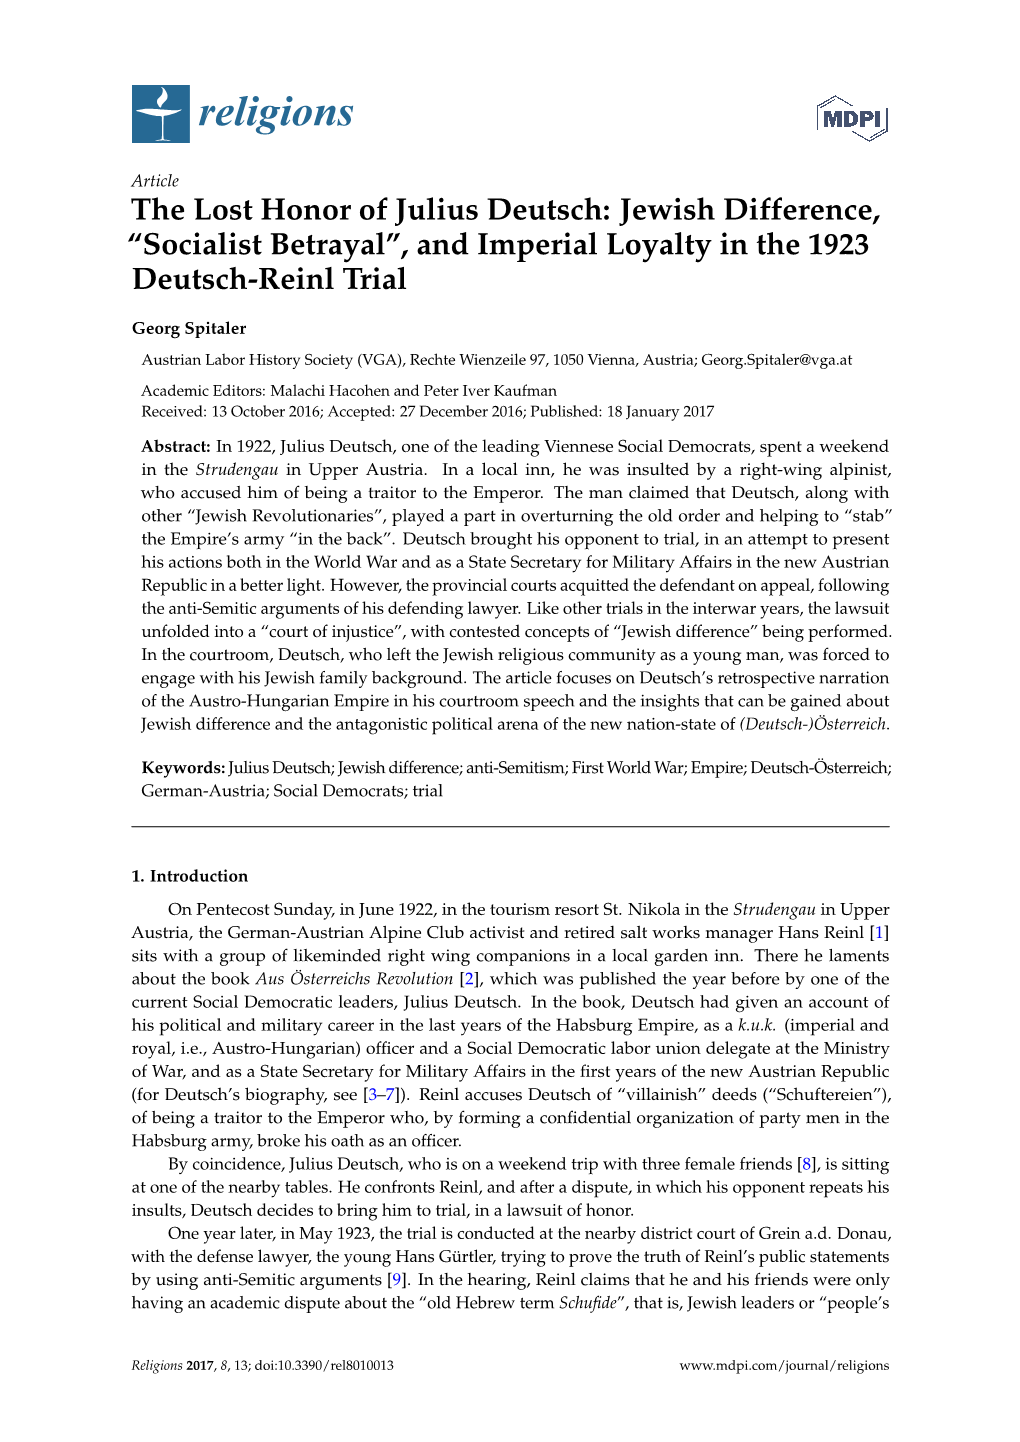 Jewish Difference, “Socialist Betrayal”, and Imperial Loyalty in the 1923 Deutsch-Reinl Trial